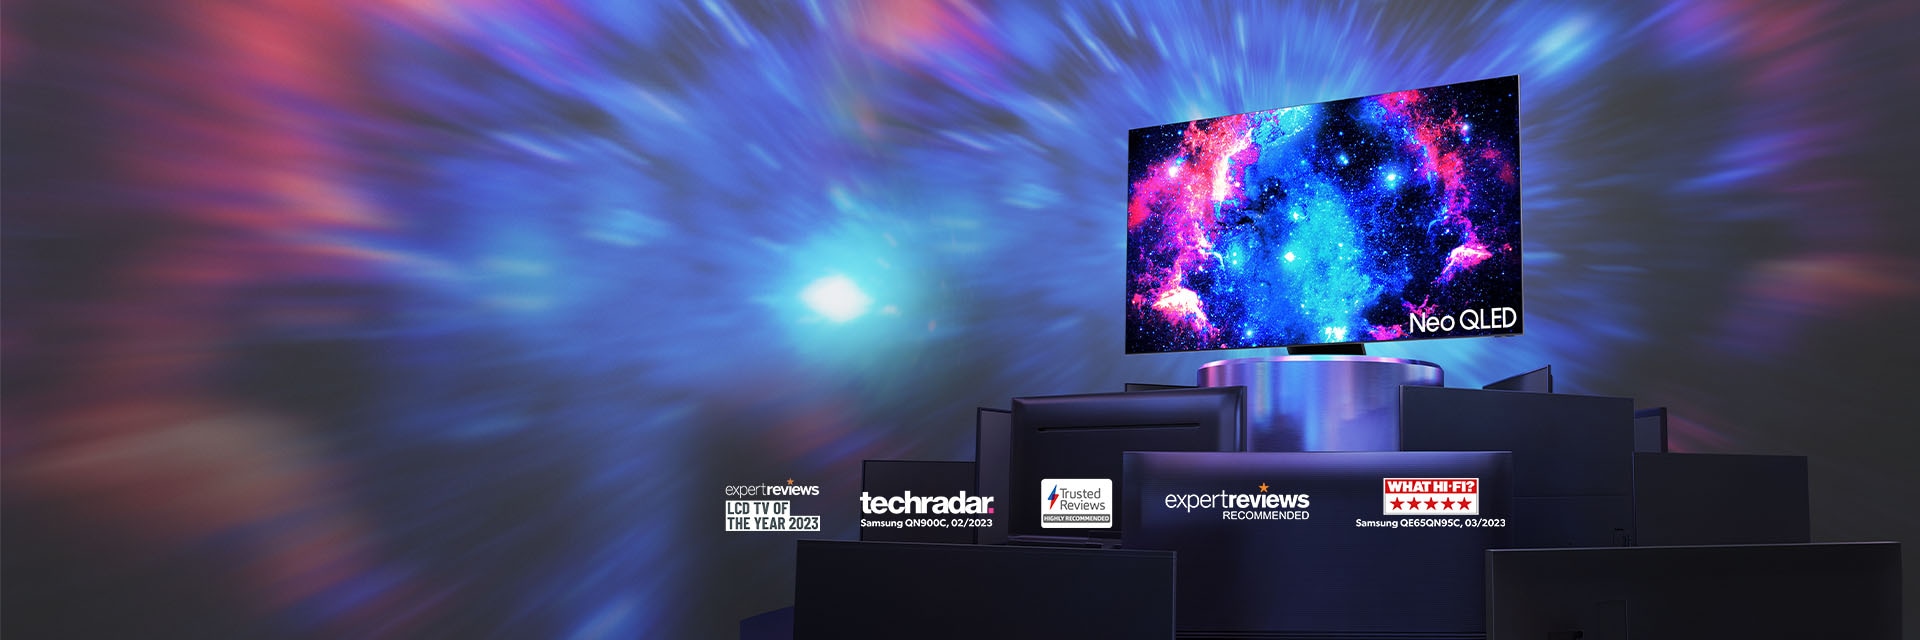 Samsung Showcases Technological Prowess With Its Latest Neo QLED, OLED TV  and Monitor Offerings at European Tech Seminar – Samsung Global Newsroom